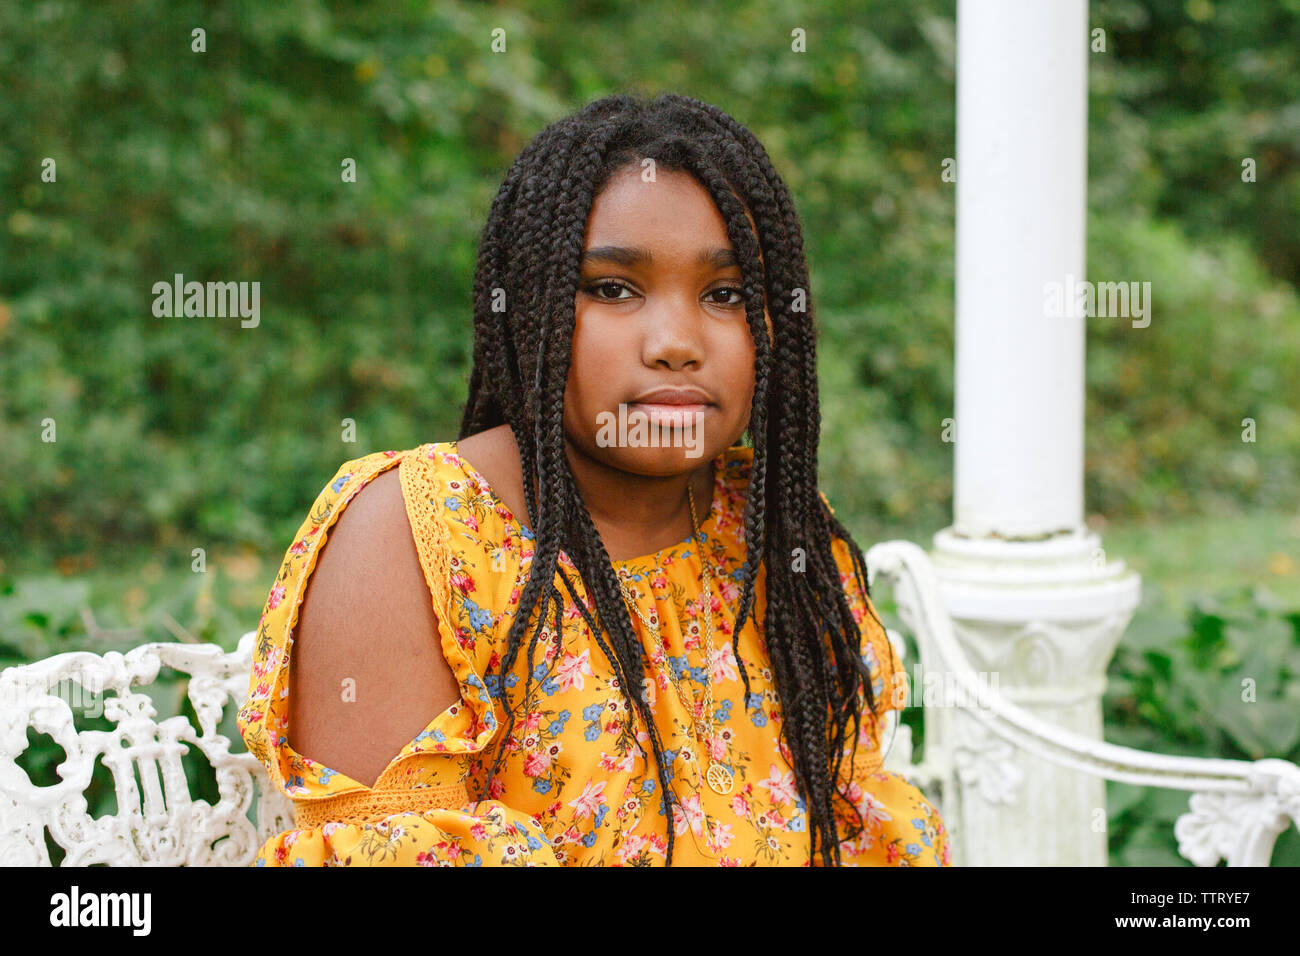 Portrait of girl with braided hair sitting on seat against plants in park Stock Photo